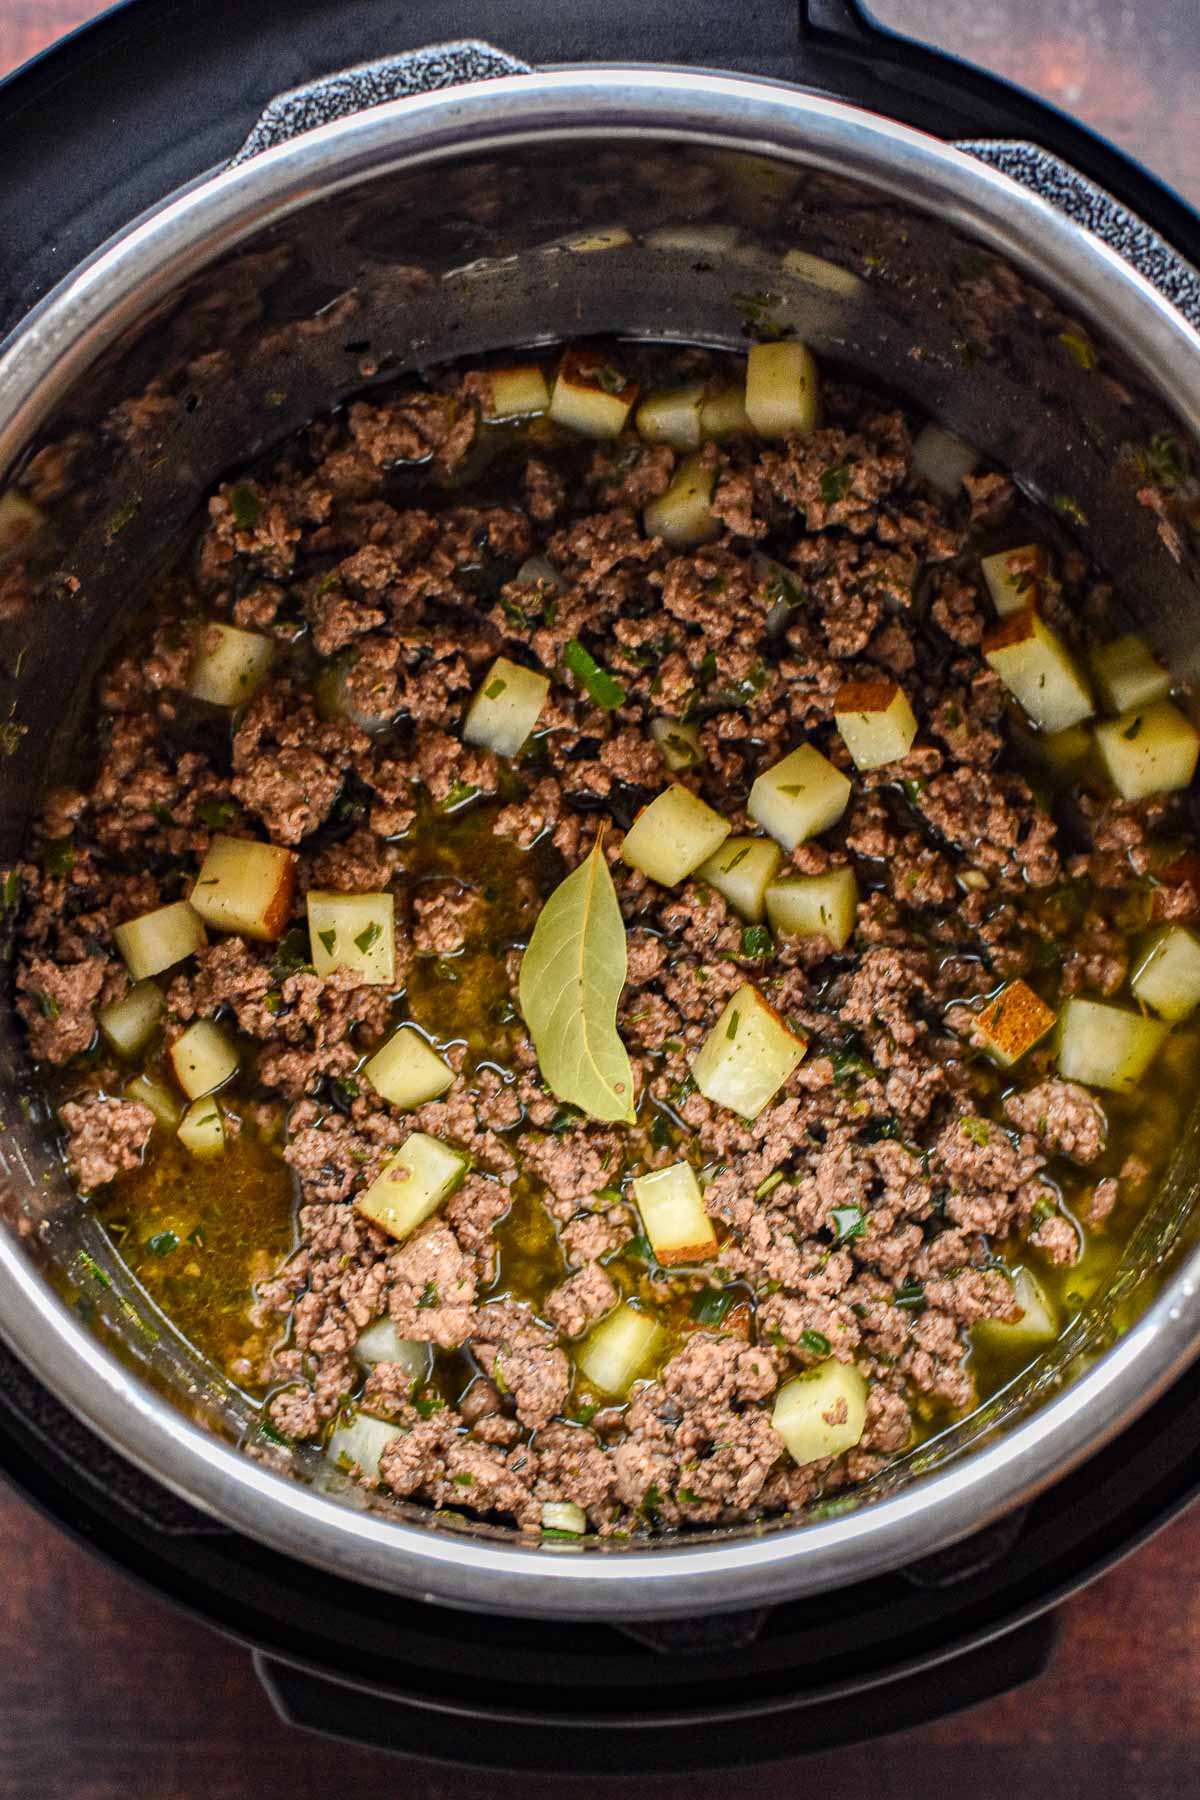 sauteed low fodmap tourtiere filling evenly distributed in an instant pot and topped with a bay leaf prior to pressure cooking.